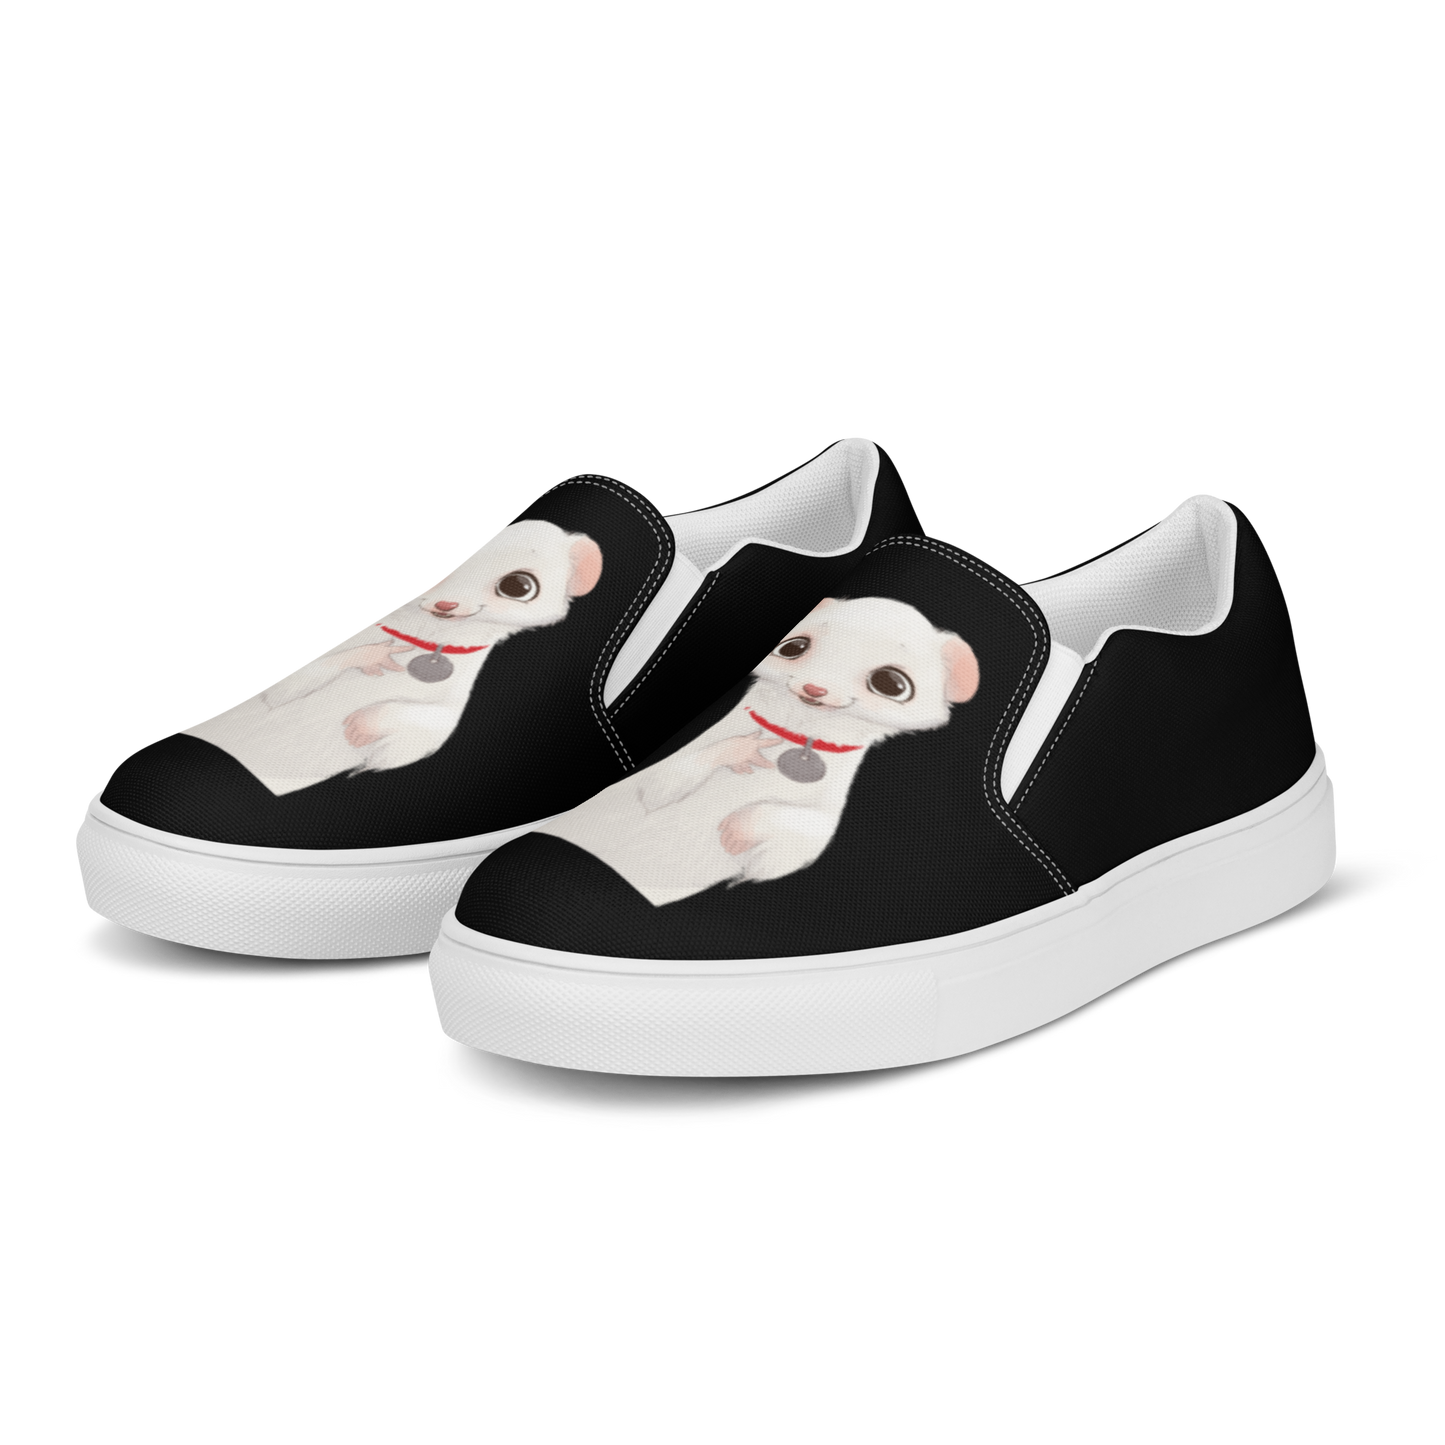 "My Name is Musky! A Ferret's Story" Women’s Slip-On Canvas Shoes!